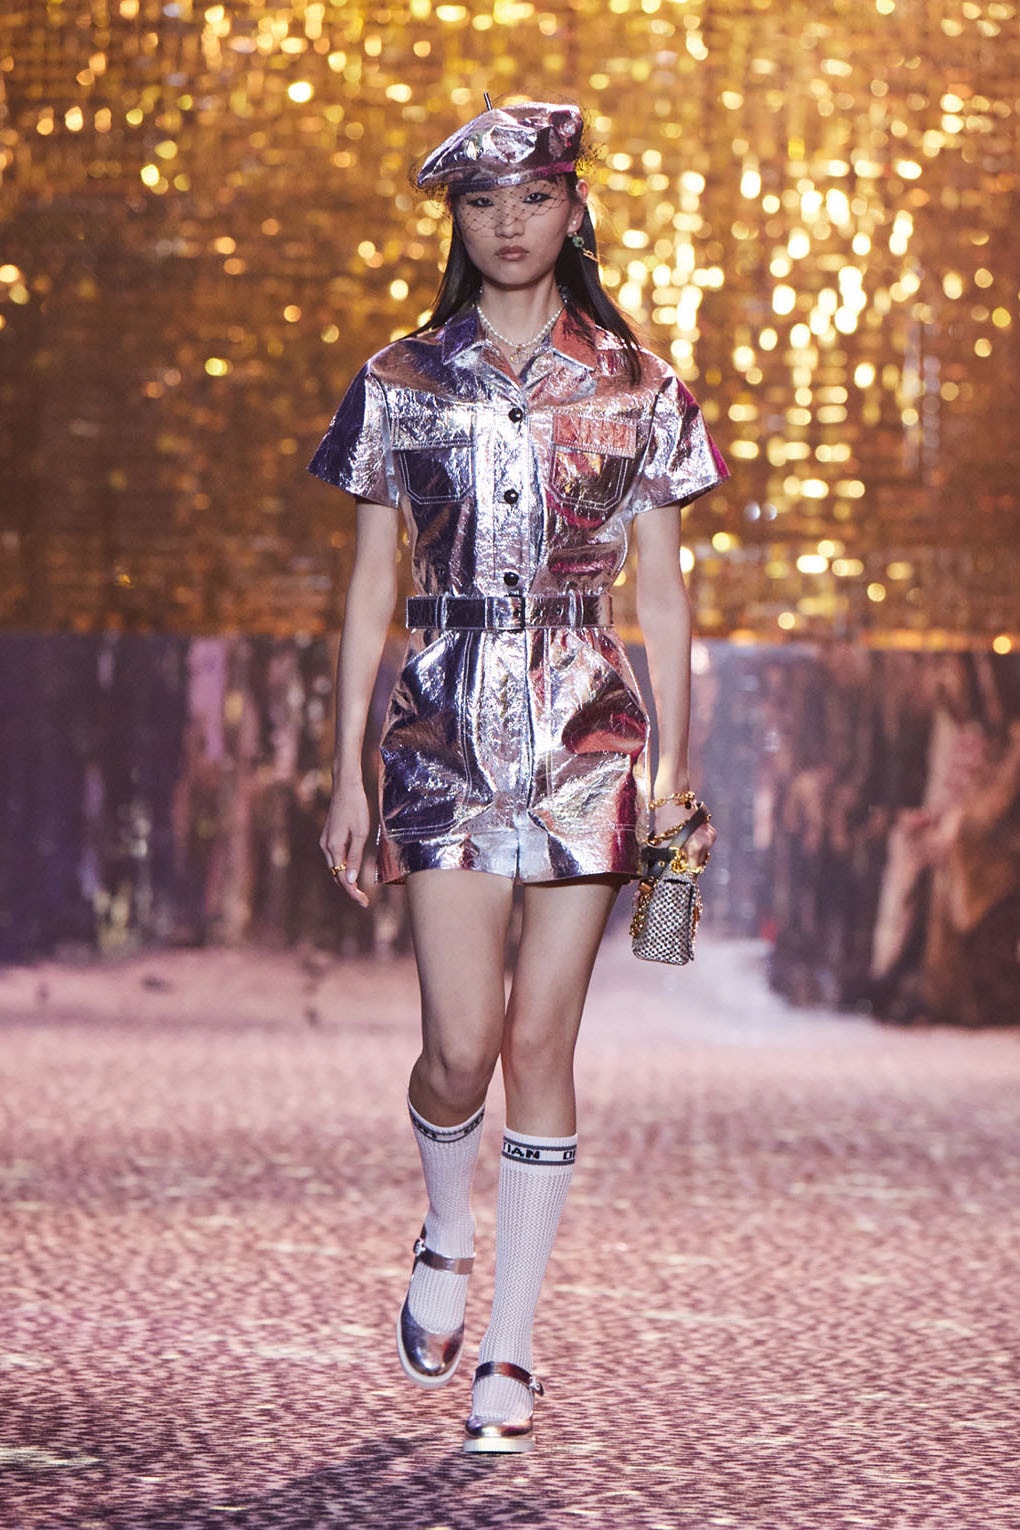 Dior Prioritizes Youth at Haute Couture Shanghai Show